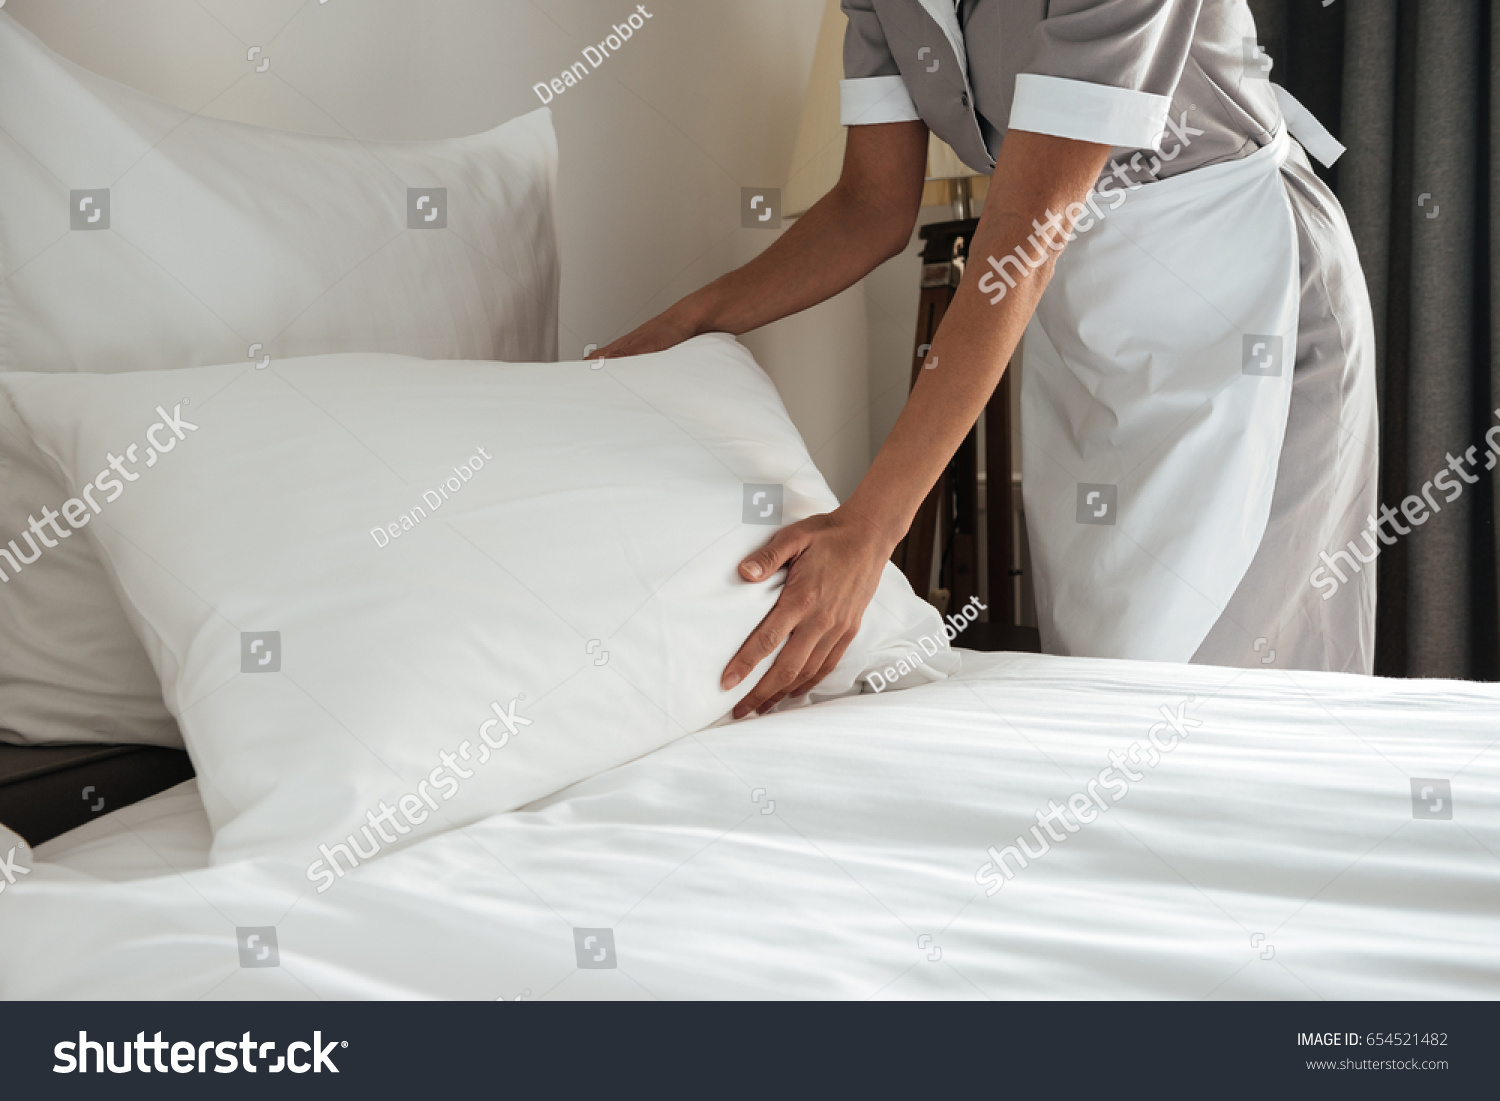 Cropped image of a female chambermaid making bed in hotel room #654521482